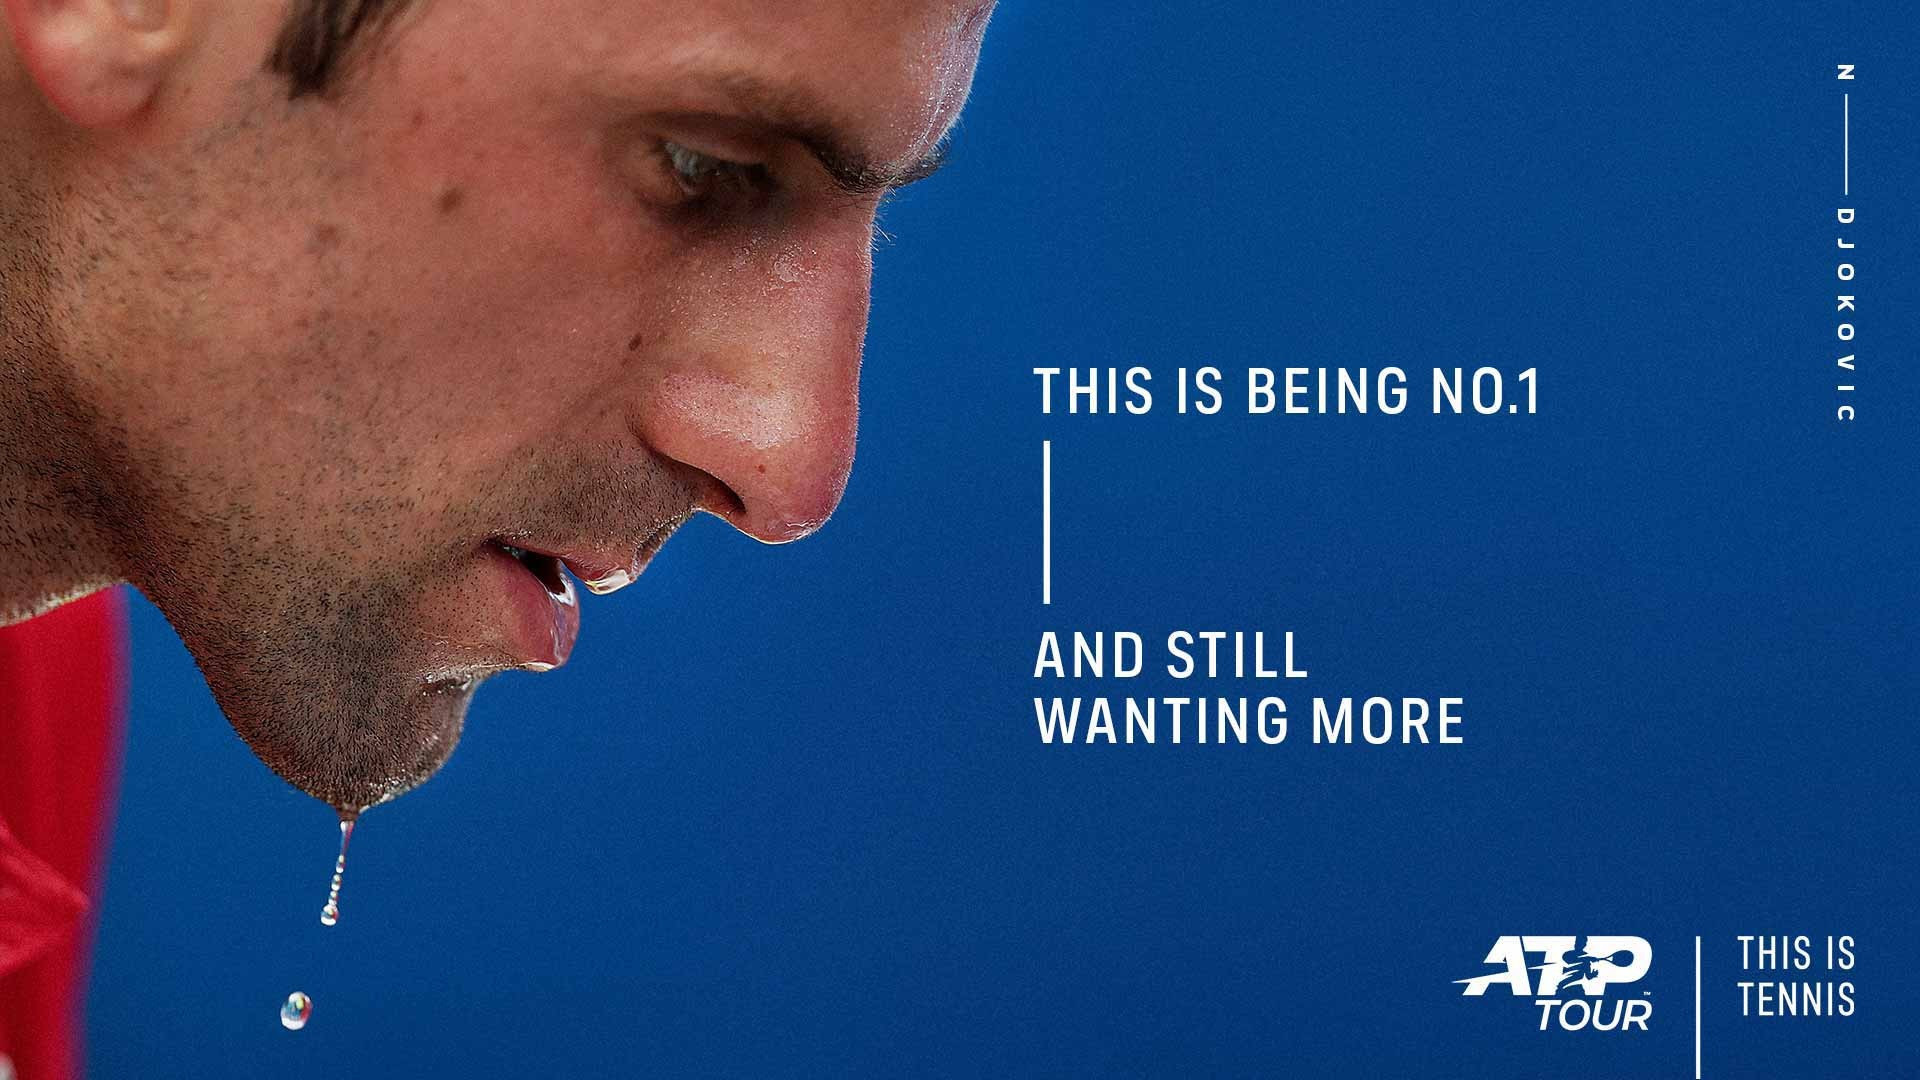 ATP launches new marketing campaign in "significant brand shift"